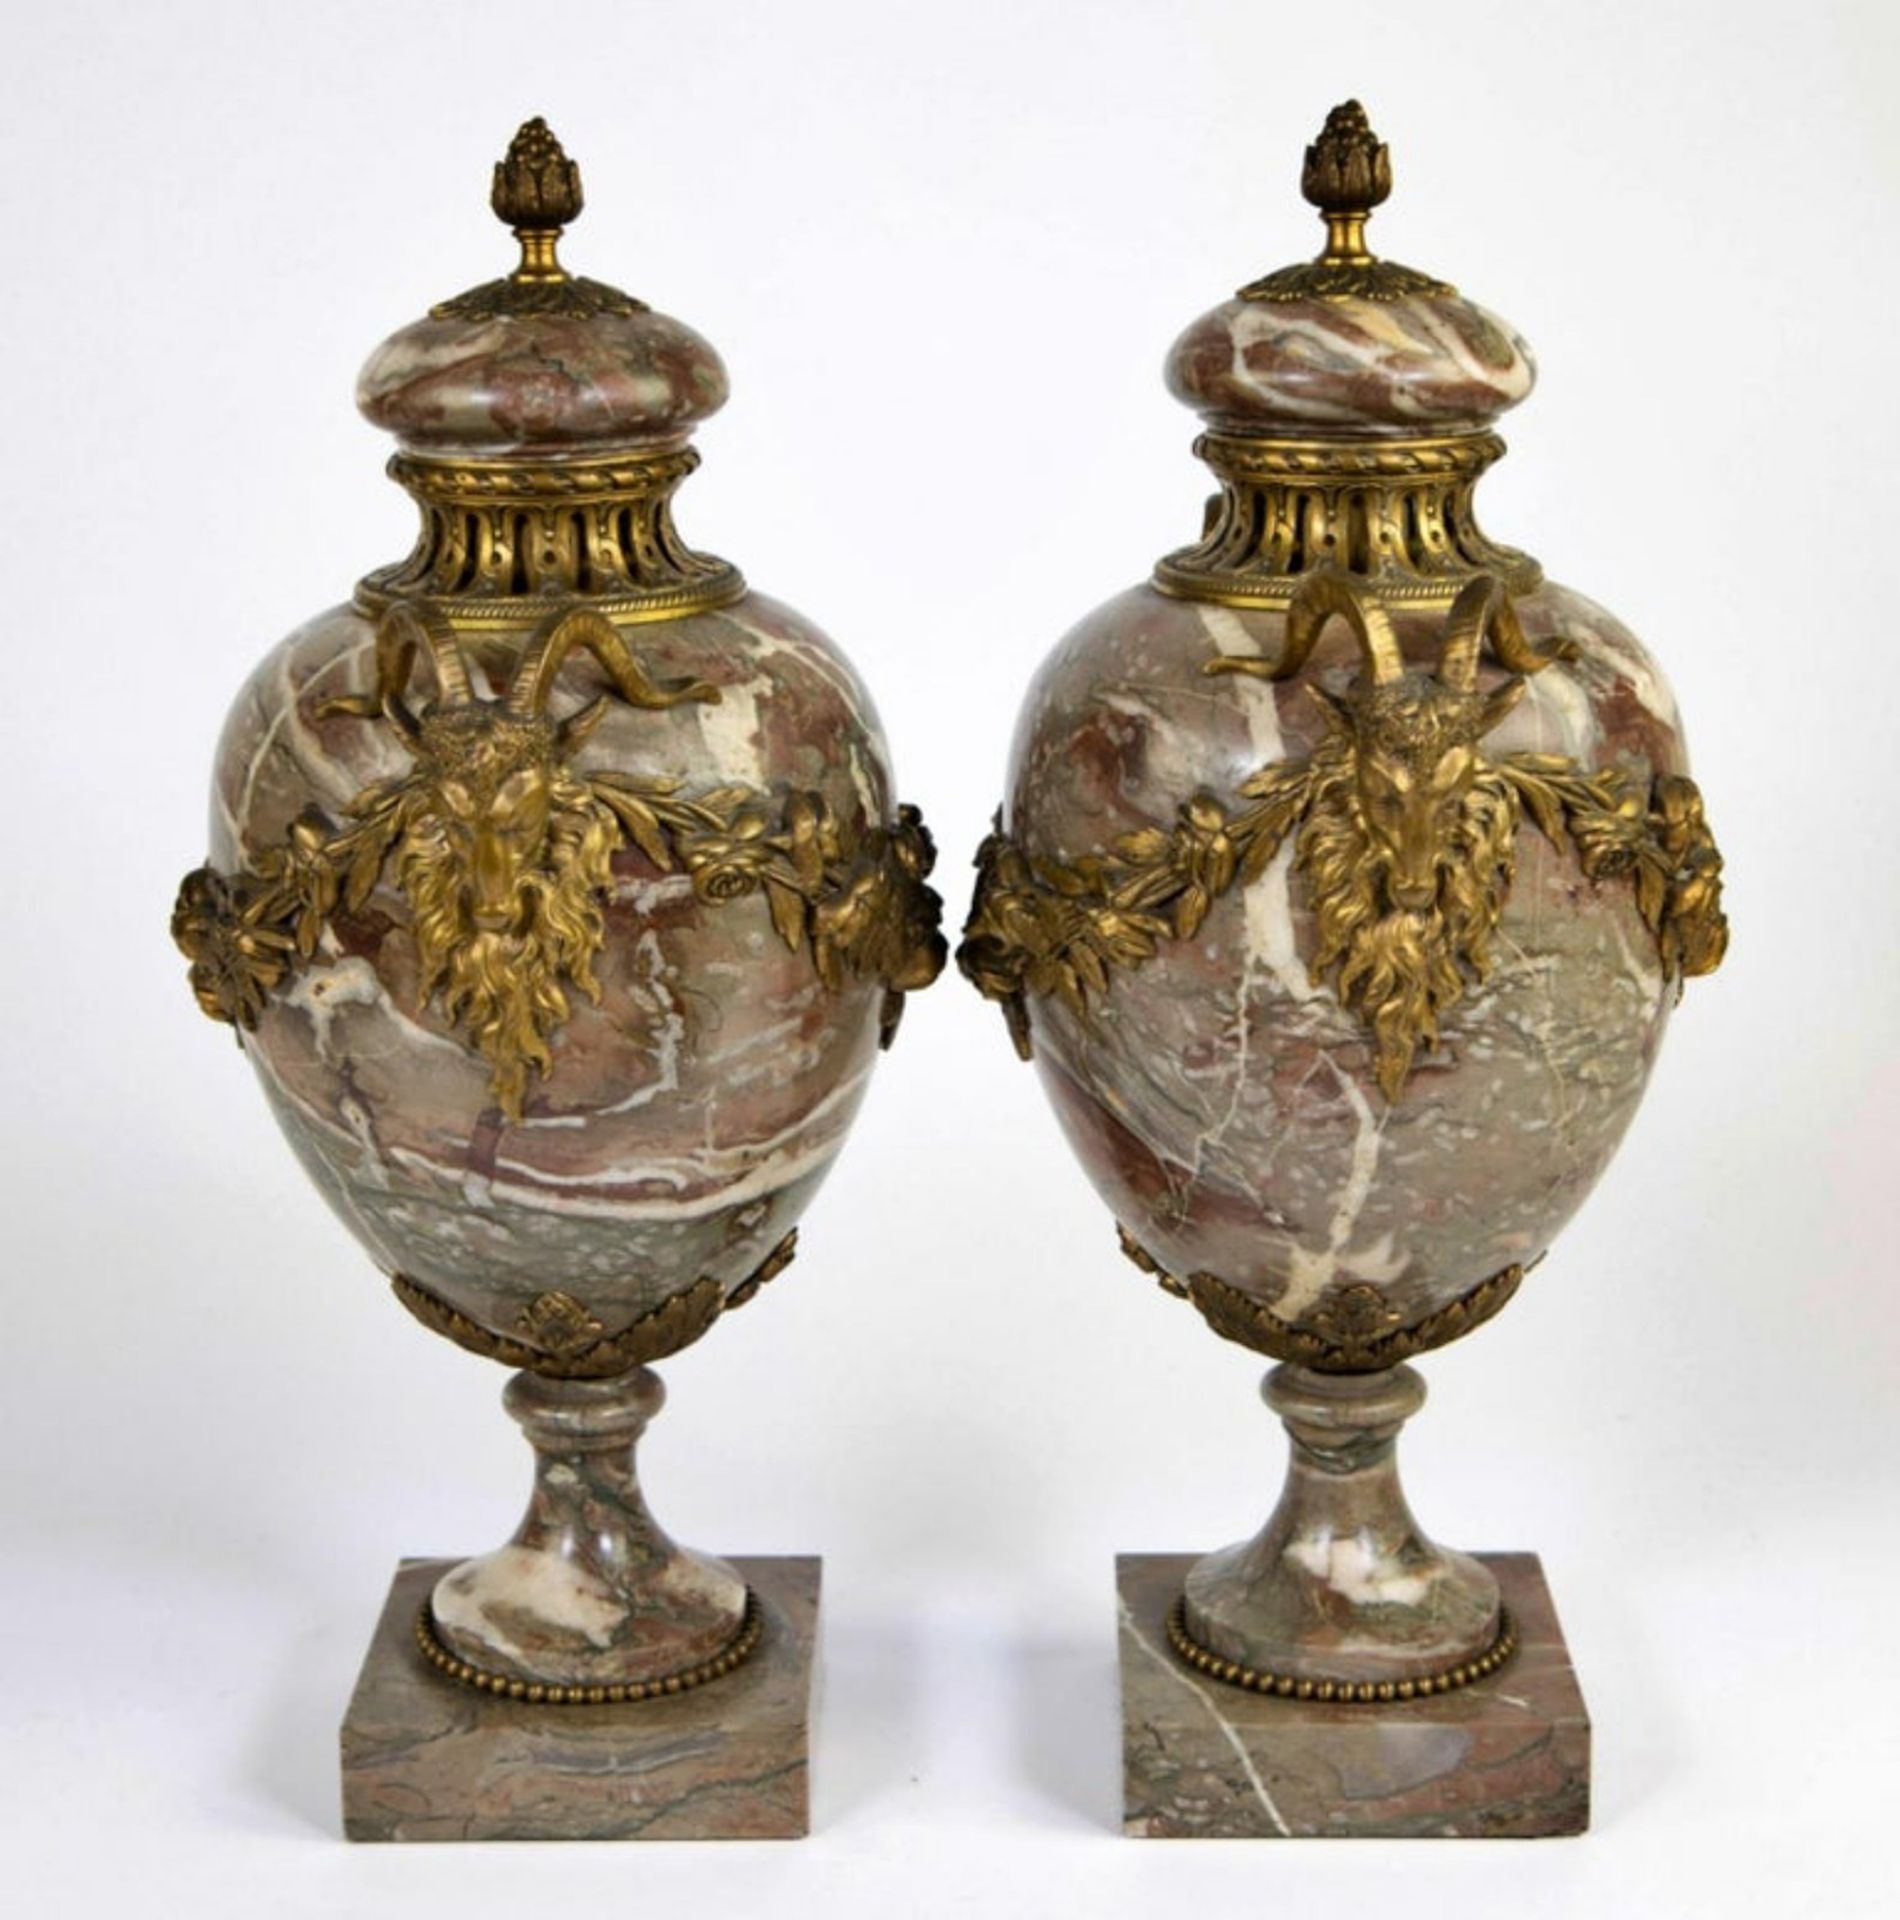 Pair of elegant French censer vases from the 19th century - Image 2 of 3